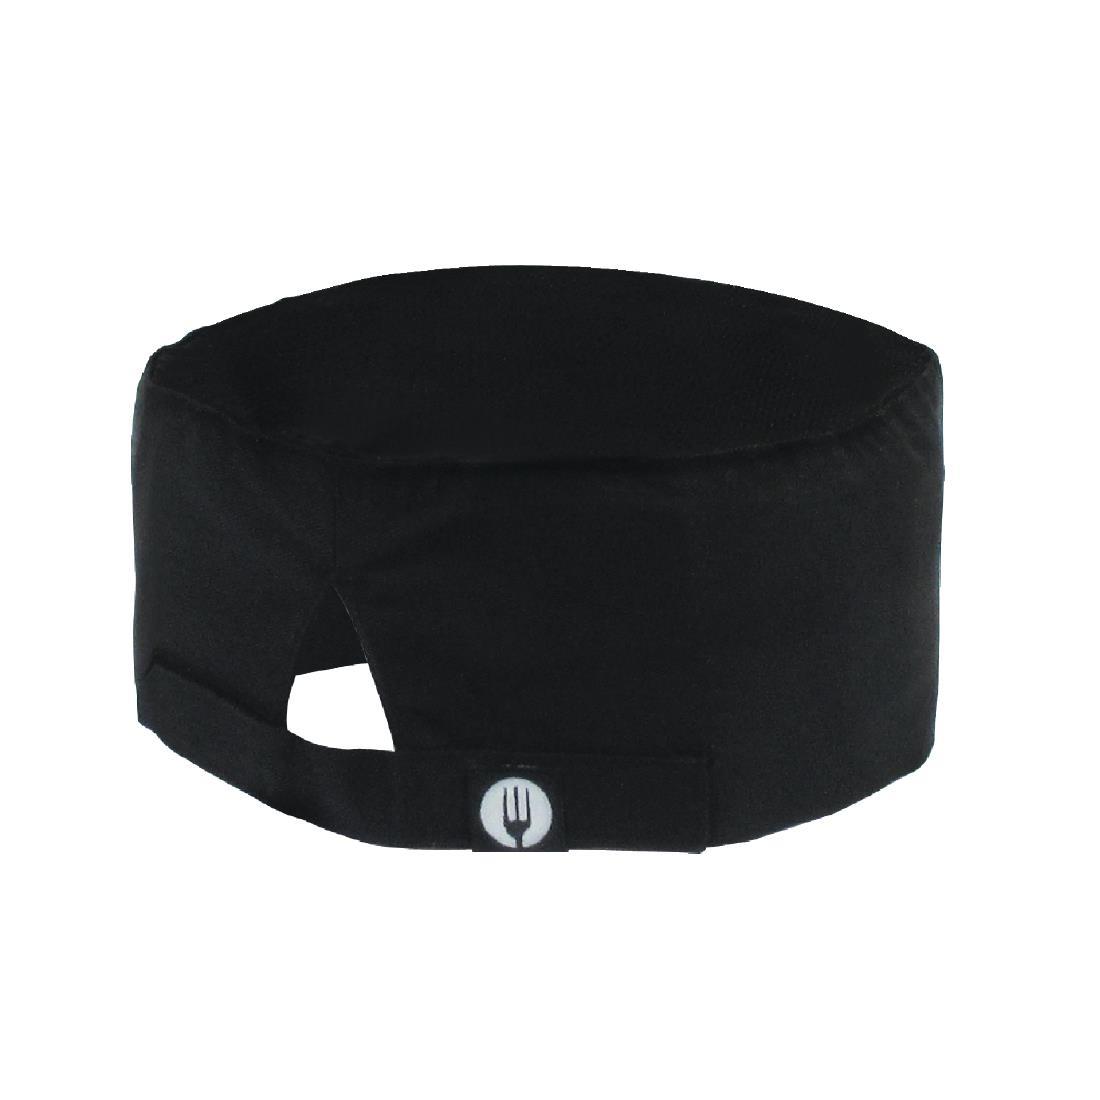 Chef Works Cool Vent Beanie Black - A704  - 1